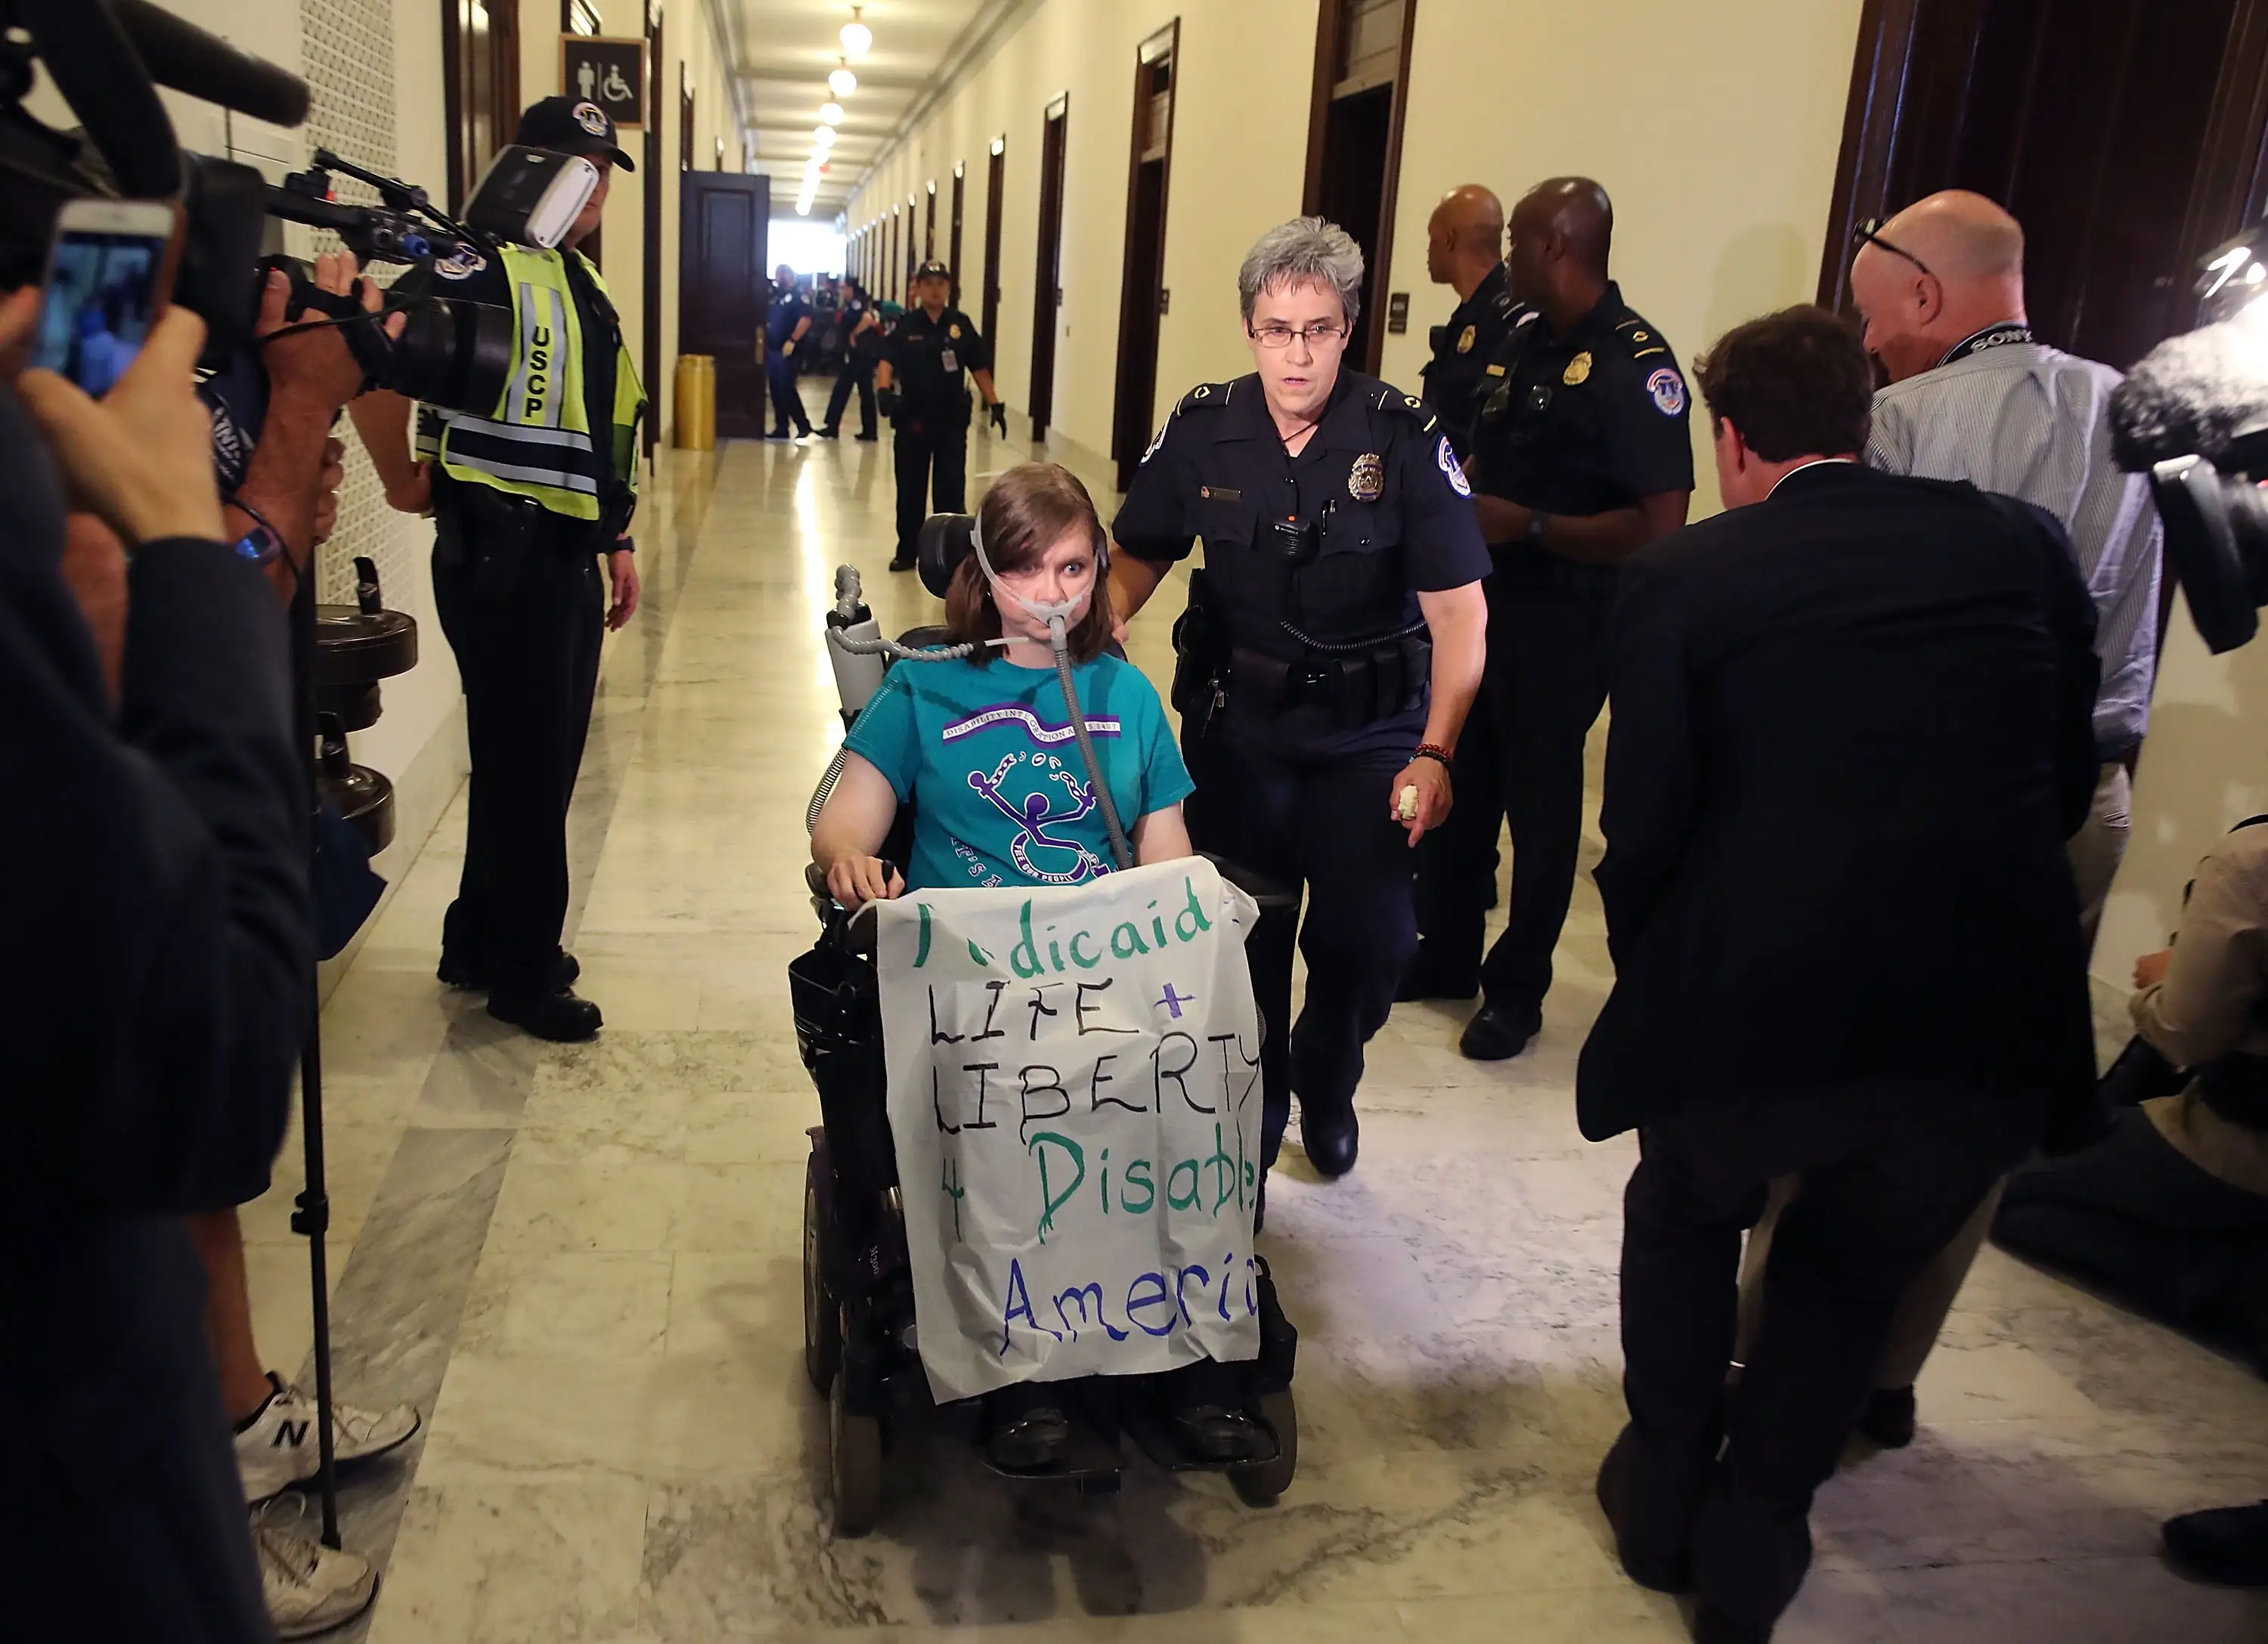 U.S. Capitol Police remove Laura Halvorson, a protester, from in front of the office of Senate Majority Leader Mitch McConnell (R-KY) inside the Russell Senate Office Building on Capitol Hill, on June 22, 2017 in Washington, DC.